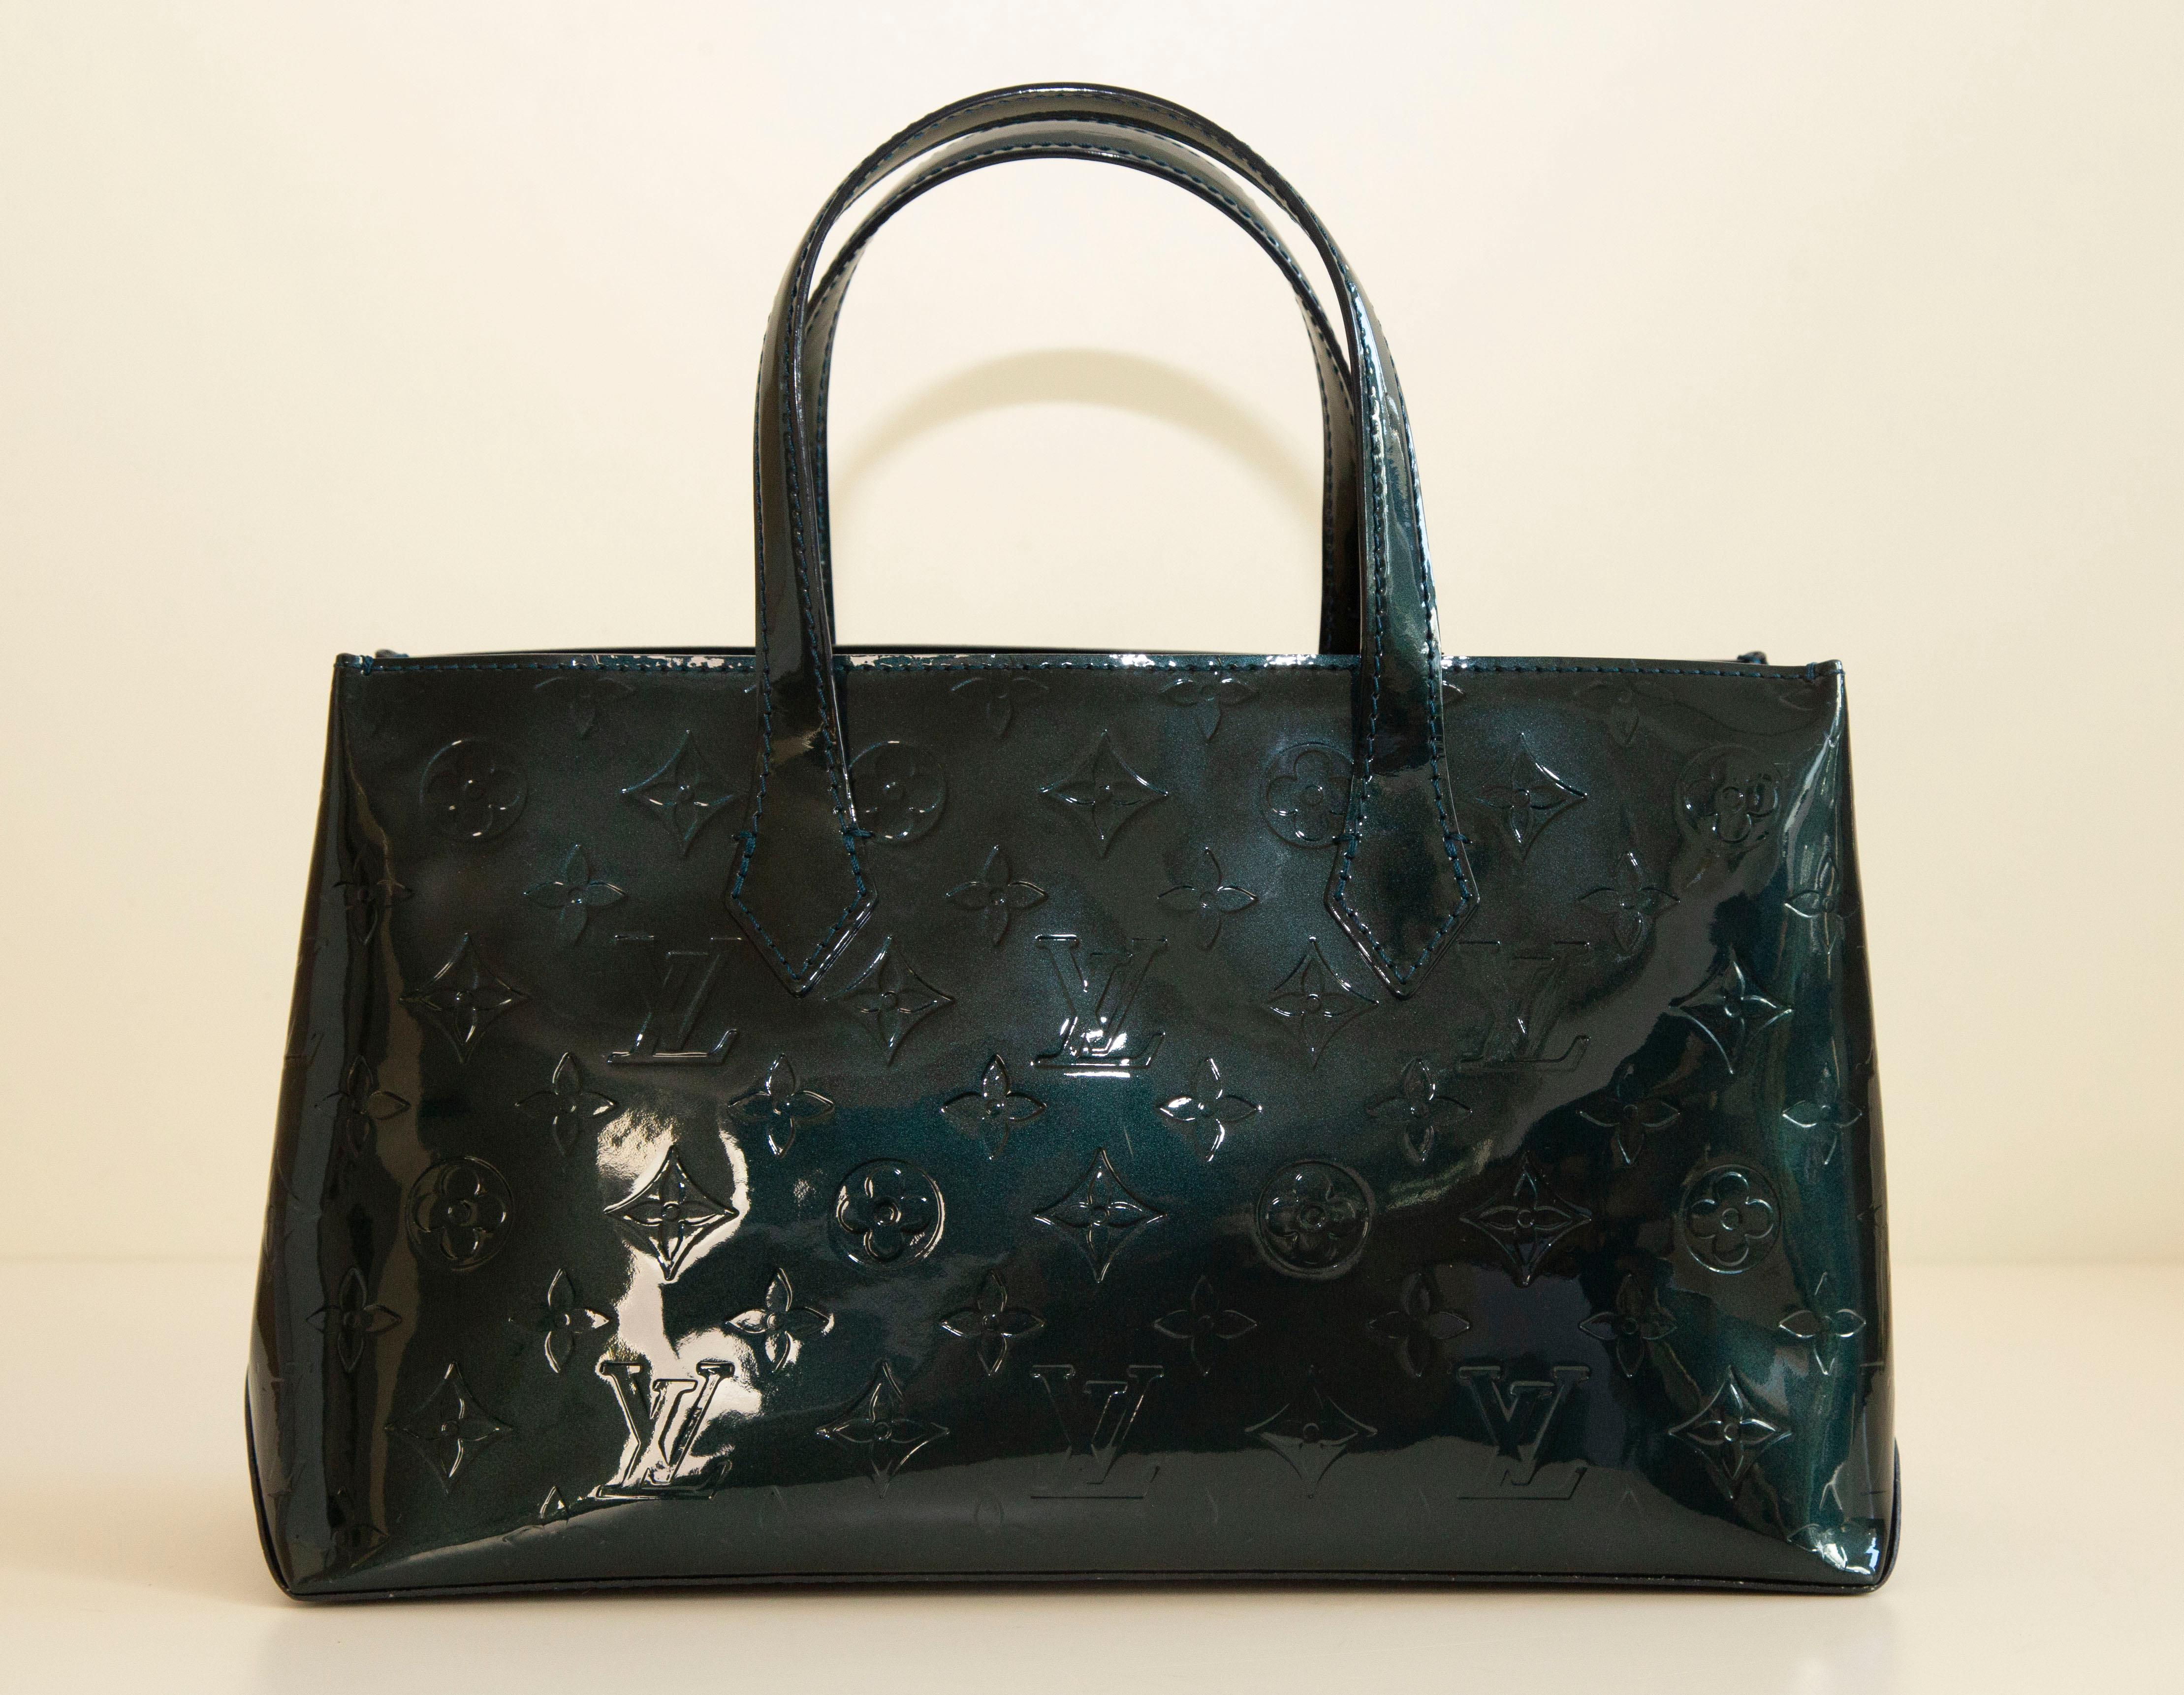 A Louis Vuitton Wilshire PM tote bag crafted from Bleu Nuit (dark green/blue color) Monogram Vernis leather. The interior is lined with a fabric and next to the major compartment it features one side pocket with a zipper. The bag will be delivered